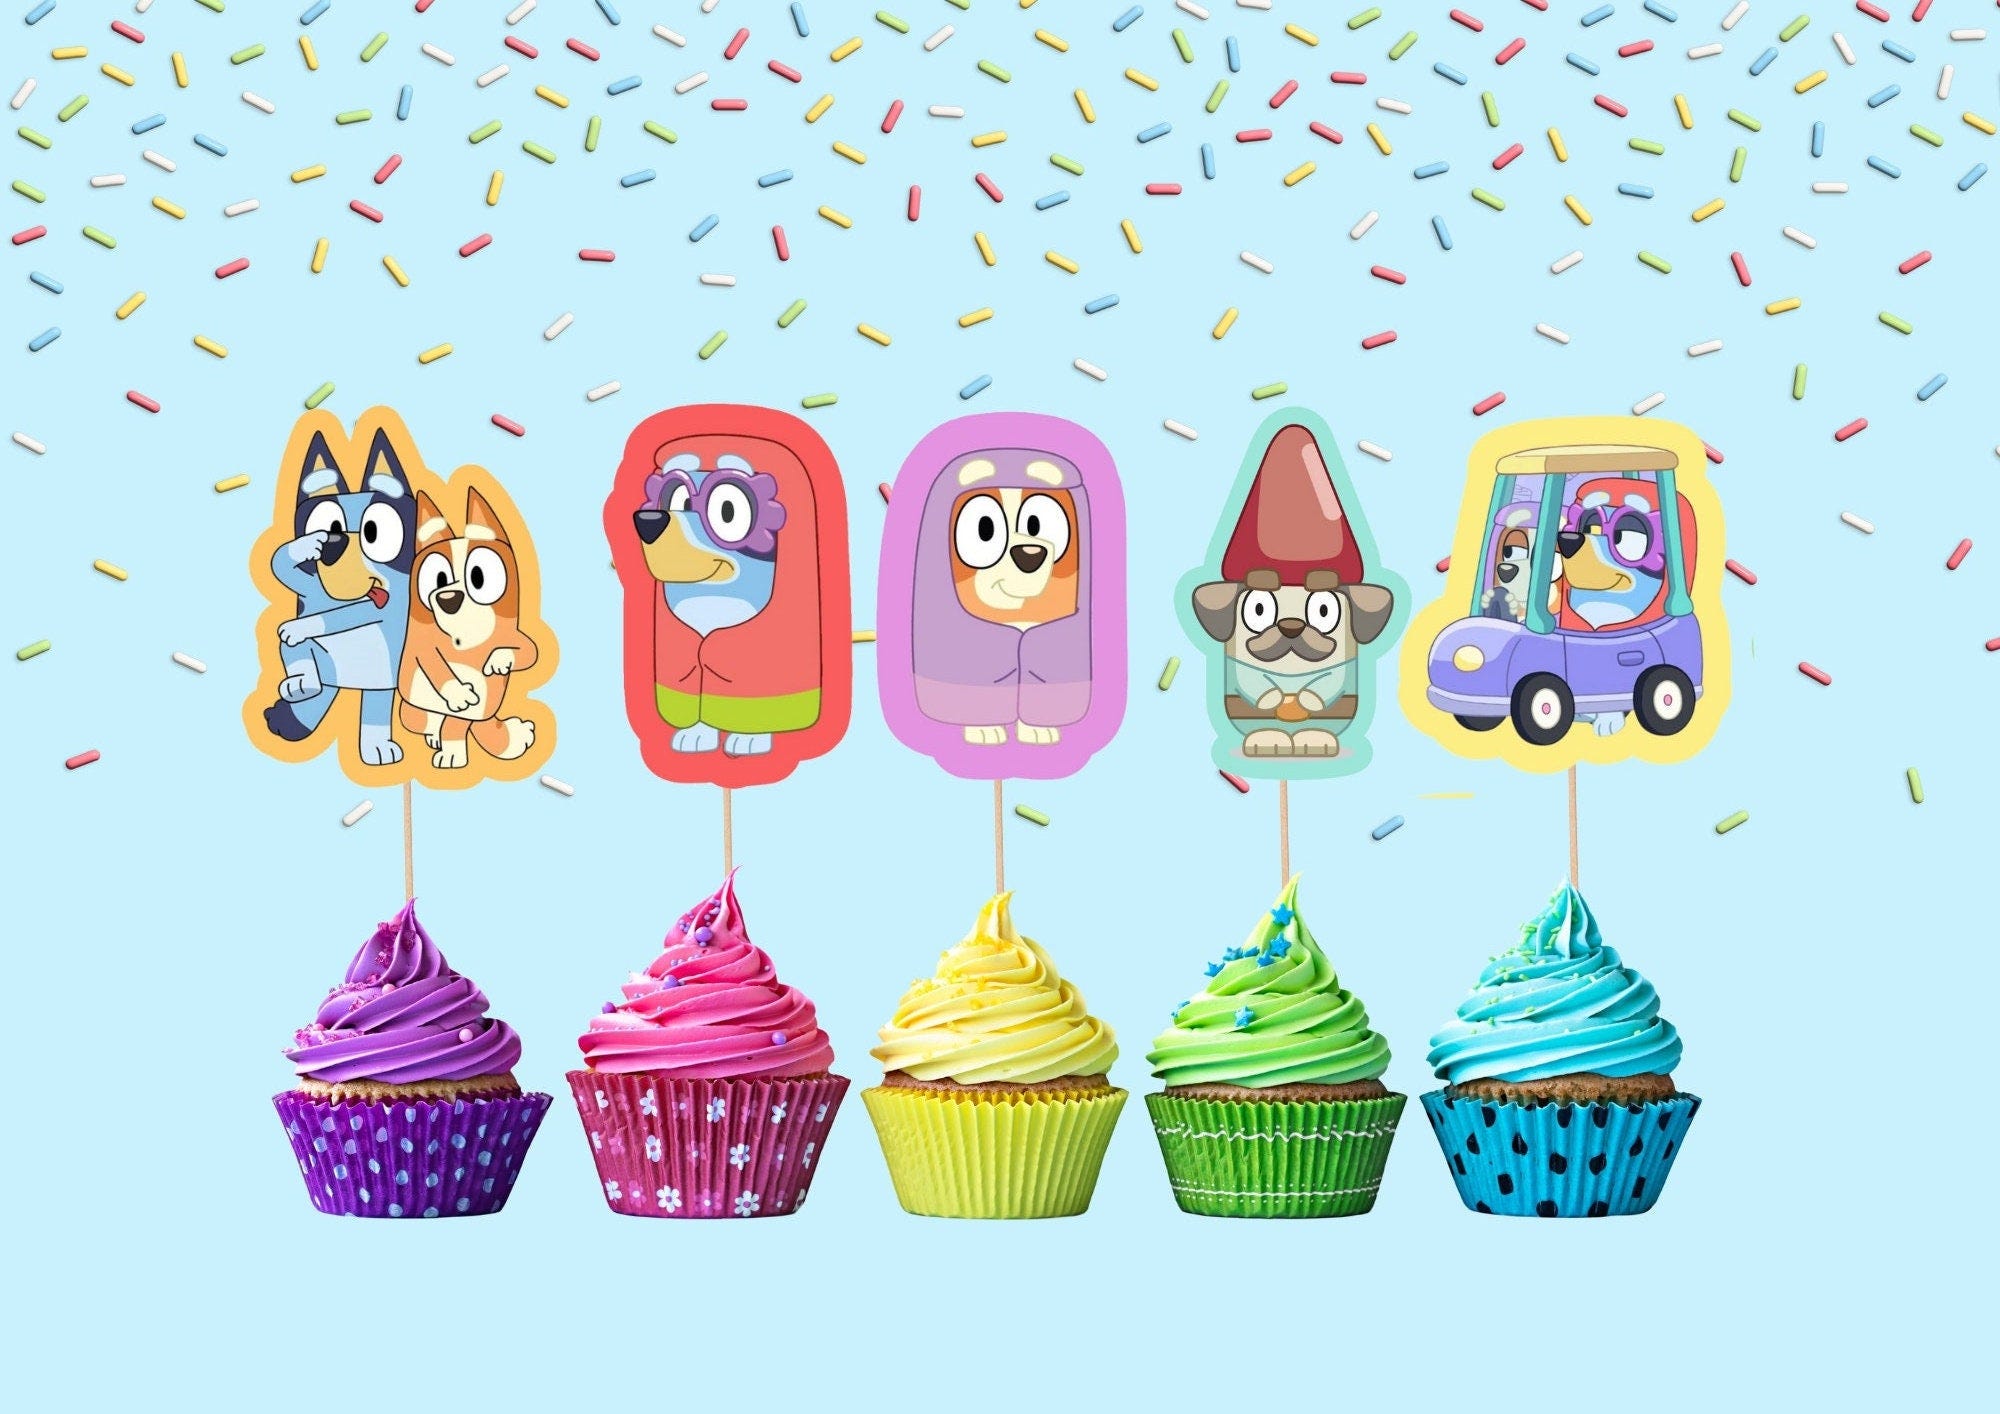 DIY Bluey Digital Cupcake Toppers - Instant Download and Easy Assembly! Grannies, muffin, socks, coco, Winton, indie, turtleboy